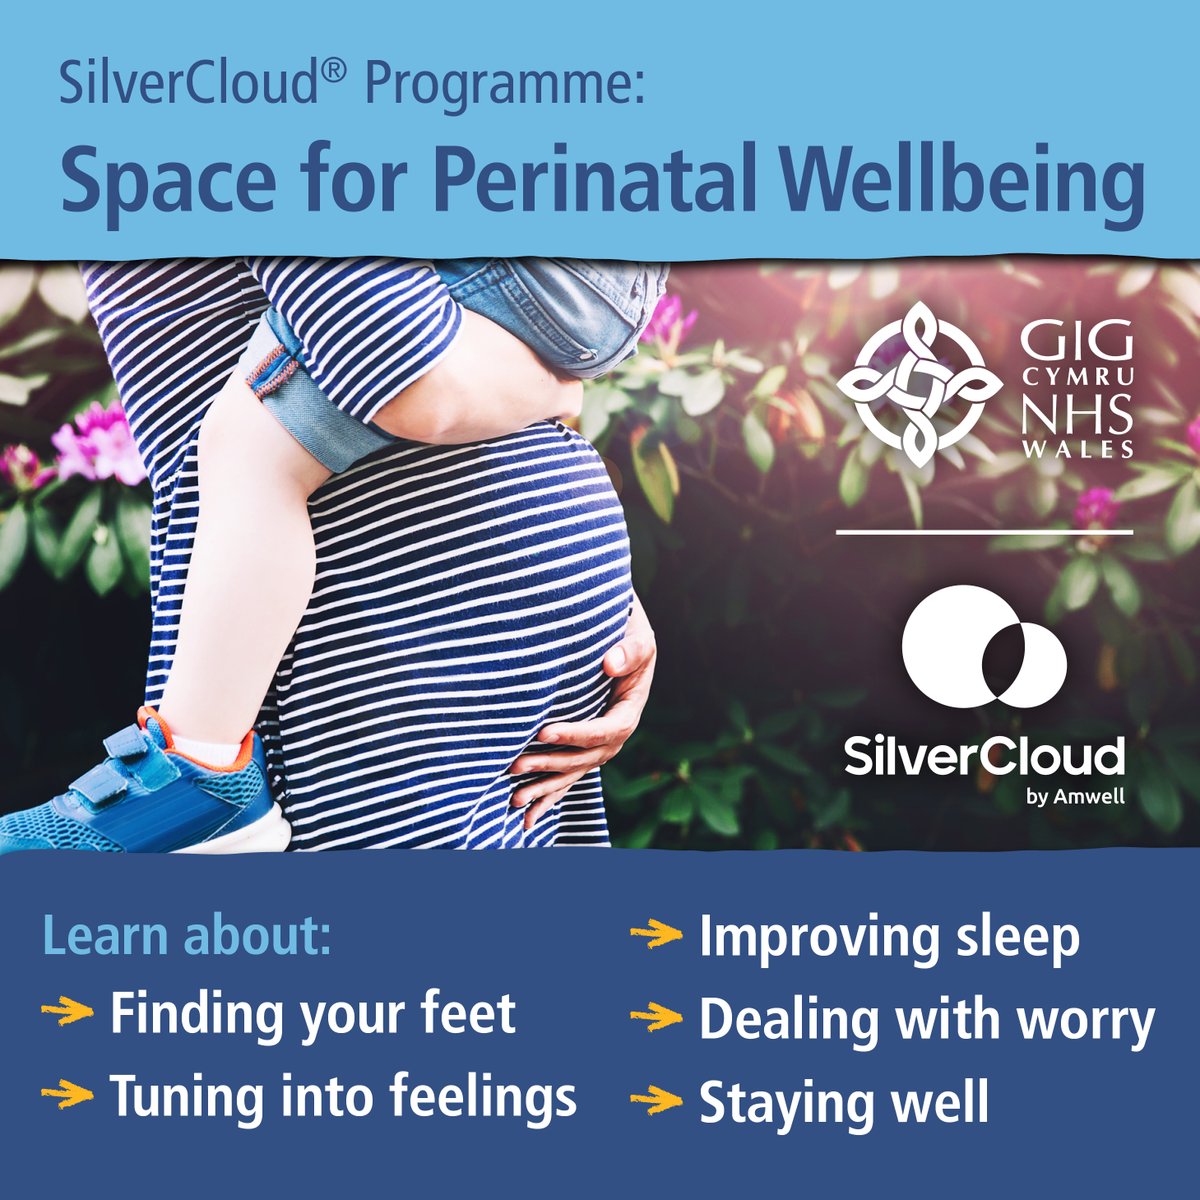 Around 1 in 5 women and 1 in 10 men will develop a mental health concern, such as #anxiety or low mood, during the perinatal period. Online guided self help programme Space for Perinatal Wellbeing can help you improve #wellbeing and feel better. #MMHAW nhswales.silvercloudhealth.com/signup/